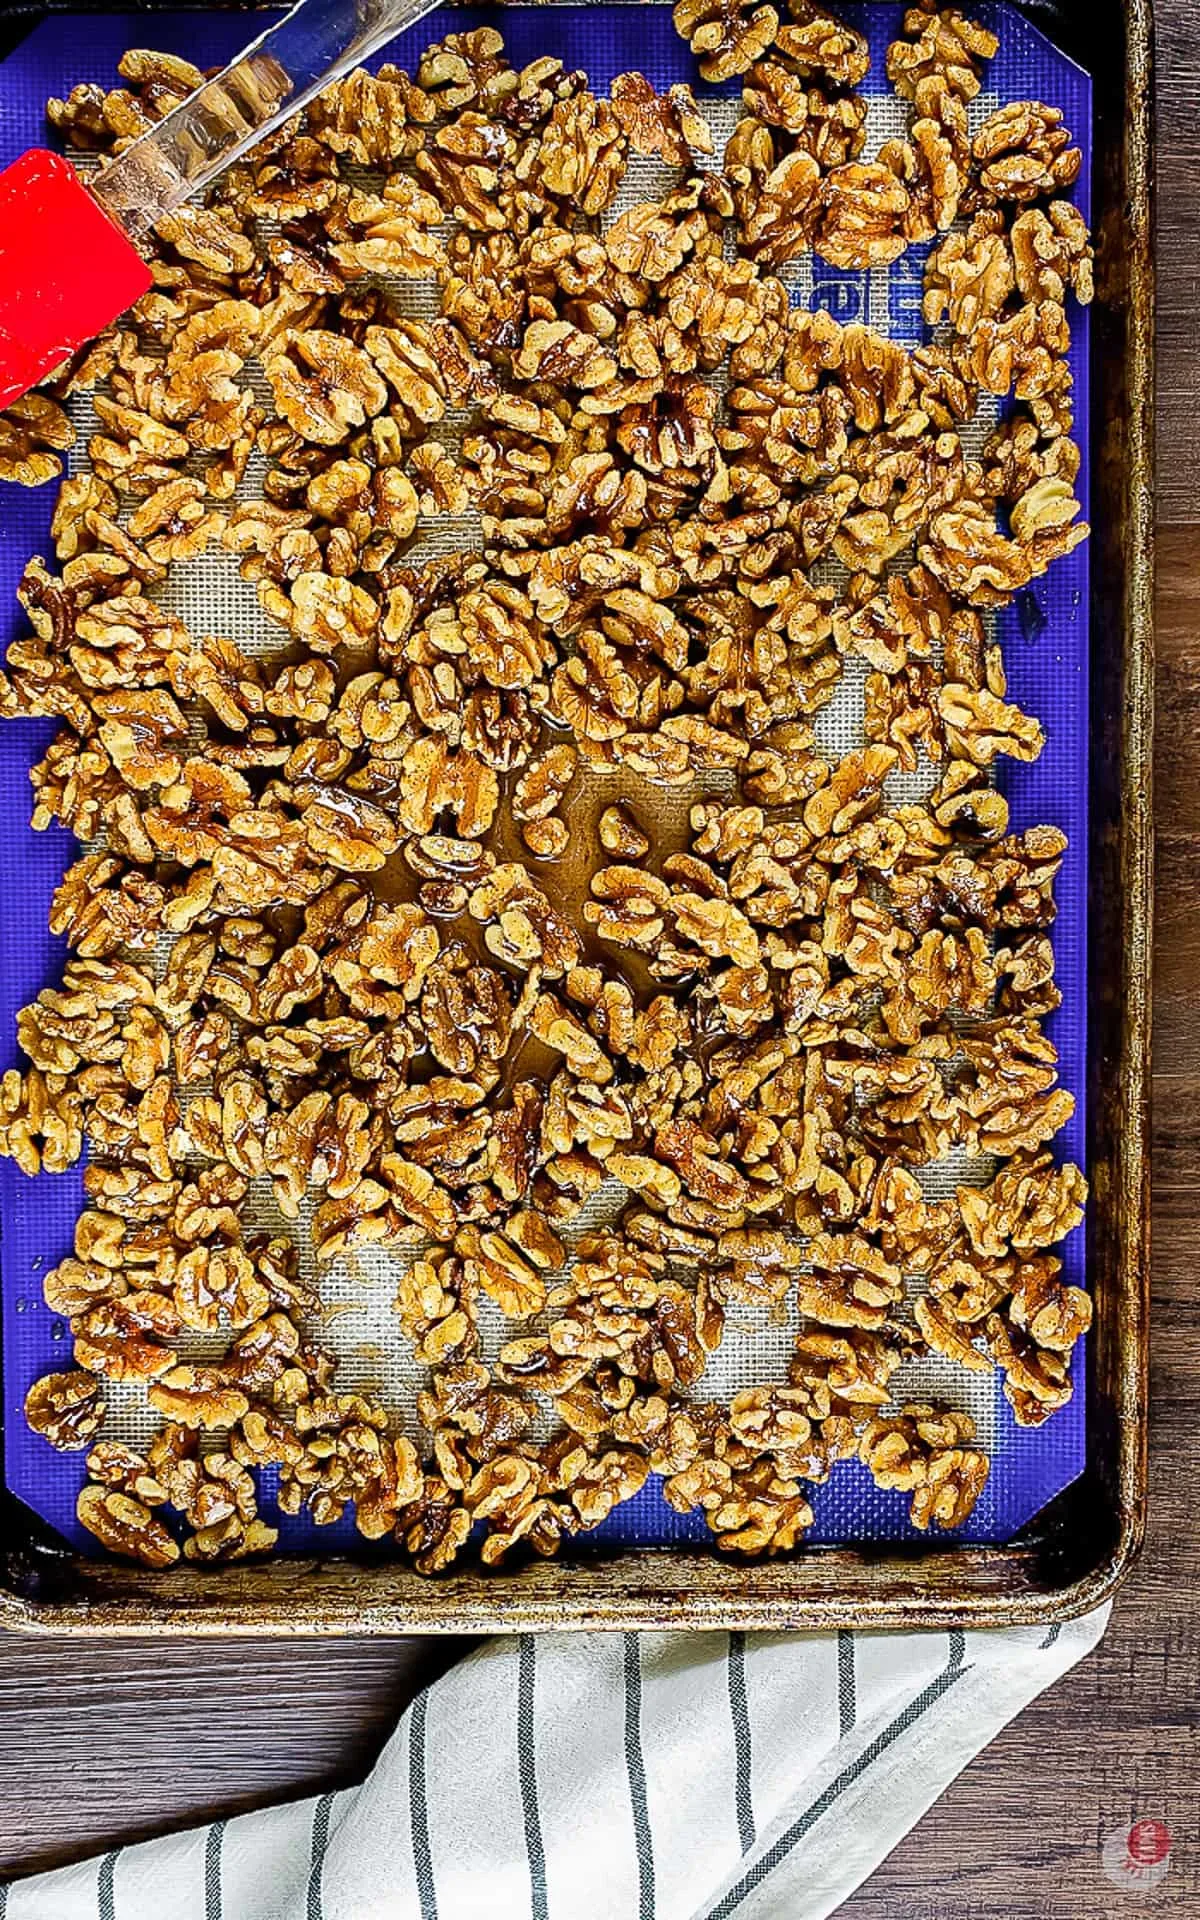 spices walnuts on a baking sheet